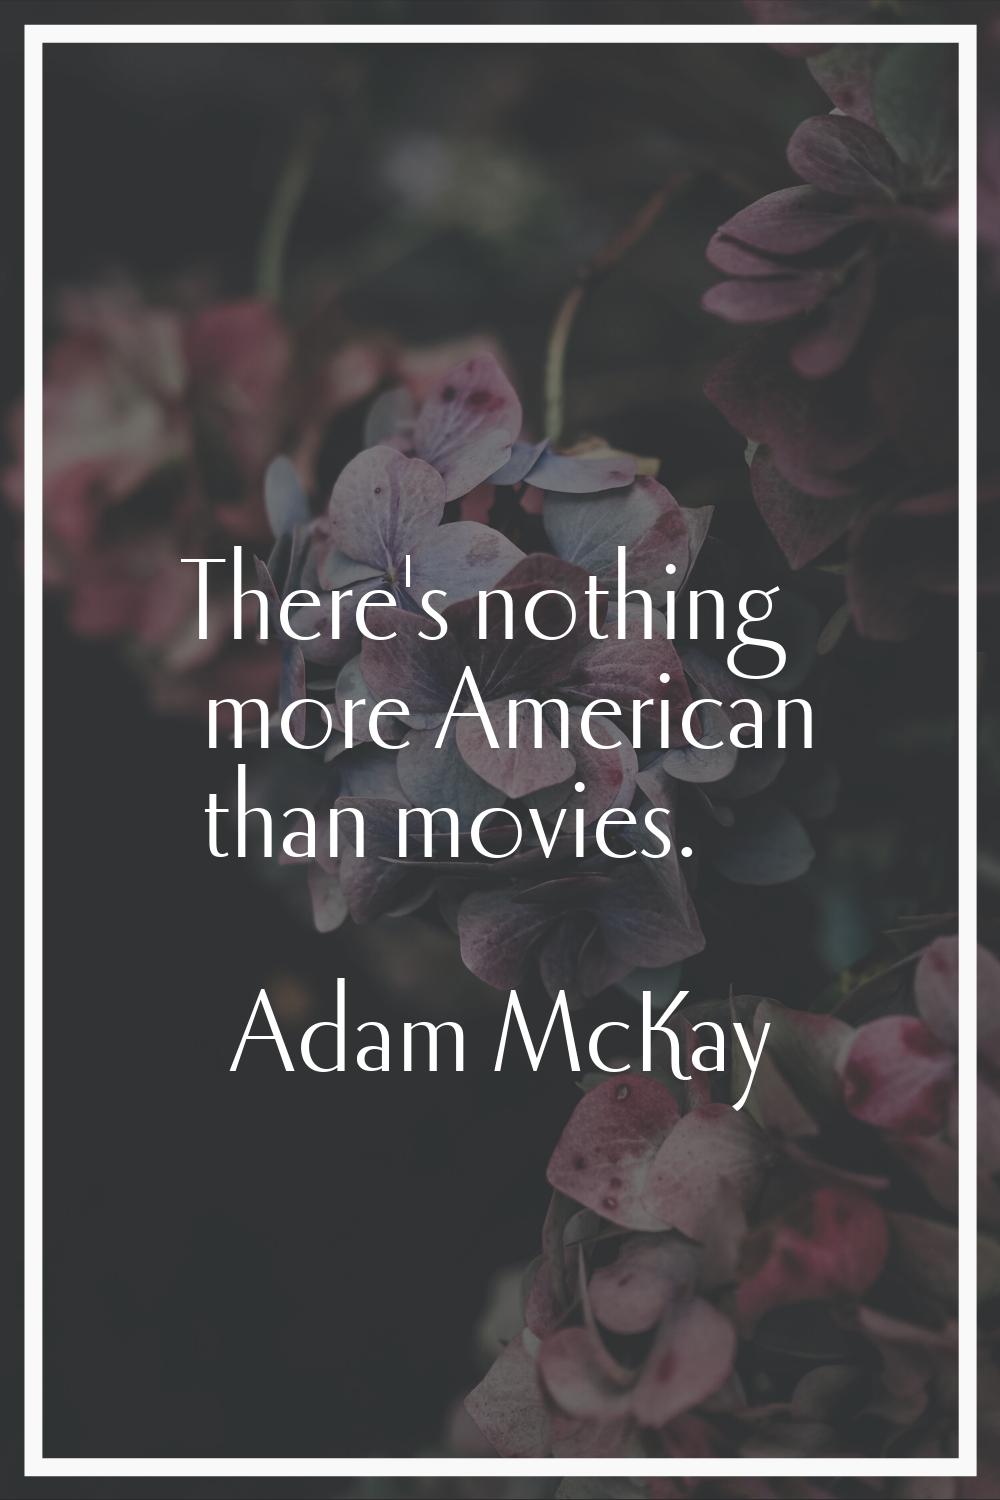 There's nothing more American than movies.